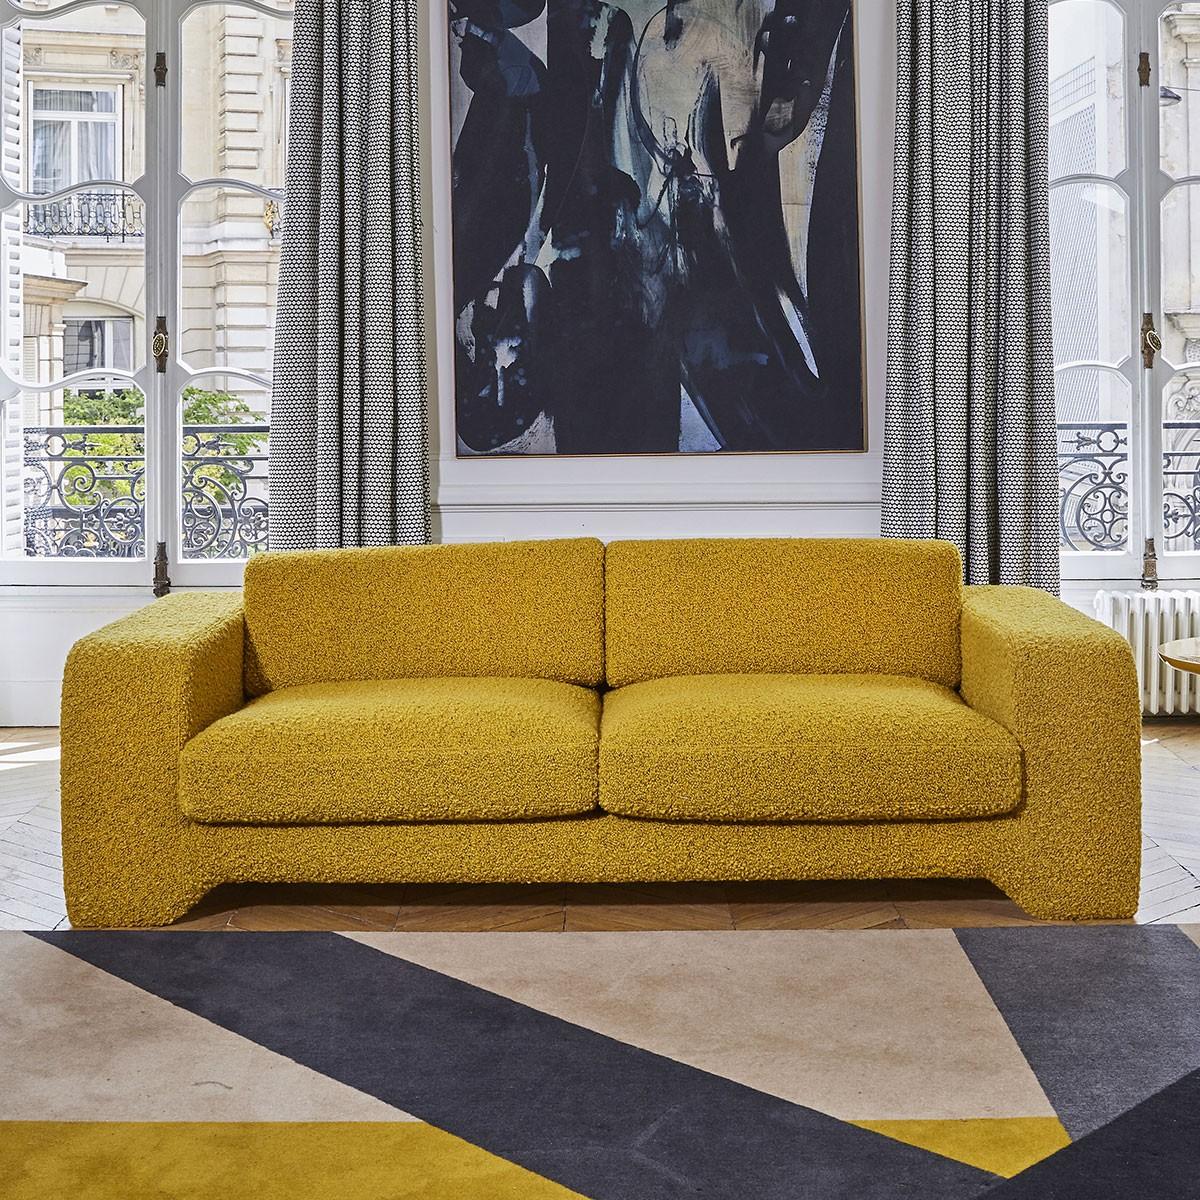 Popus Editions Giovanna 2.5 seater sofa in yellow verone velvet upholstery

Giovanna is a sofa with a strong profile. A sober, plush line, with this famous detail that changes everything, so as not to forget its strength of character and this